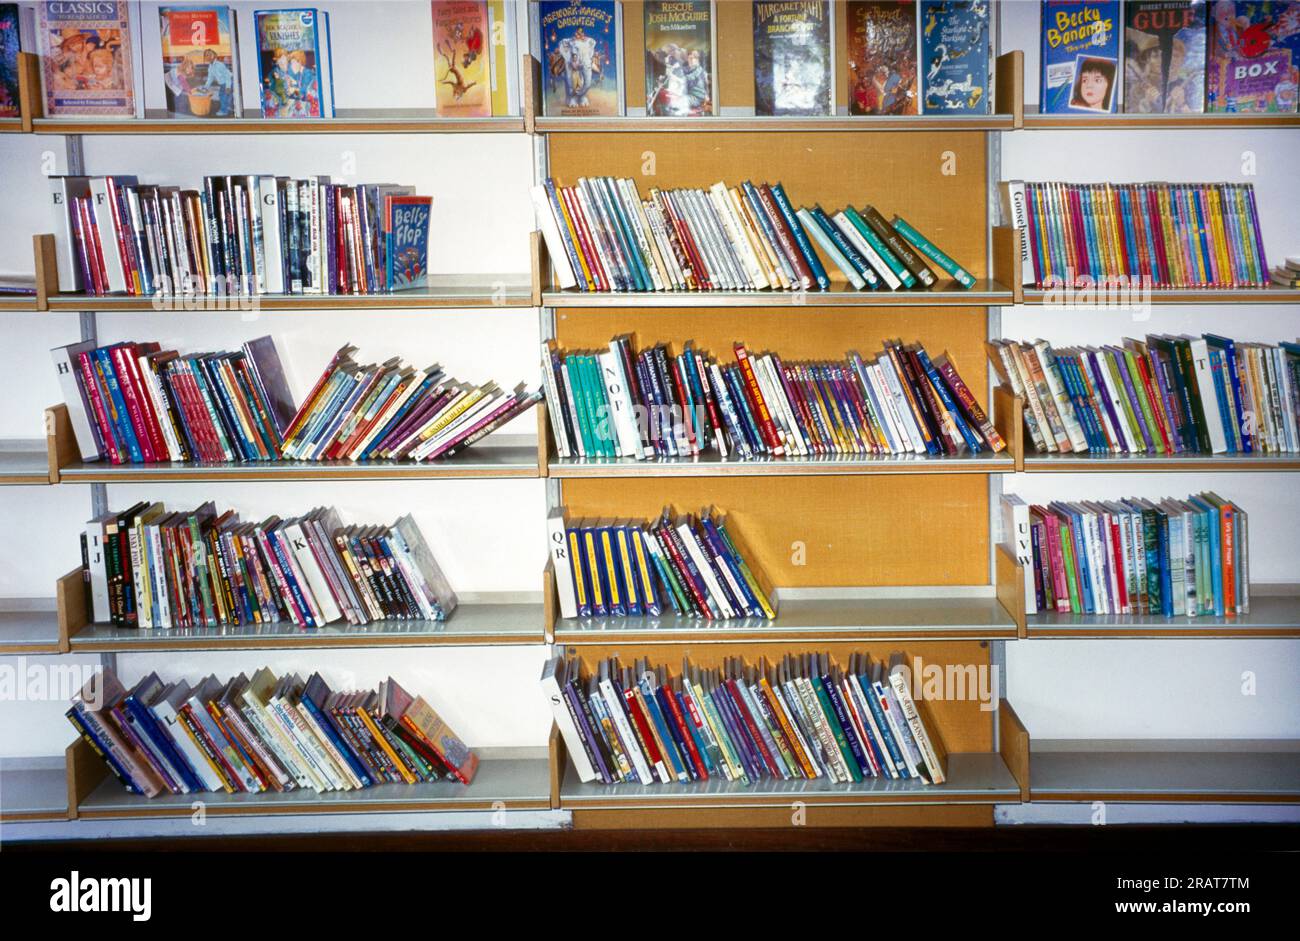 Cheam Library Children's Books Stacked on Shelves Surrey England Stock Photo